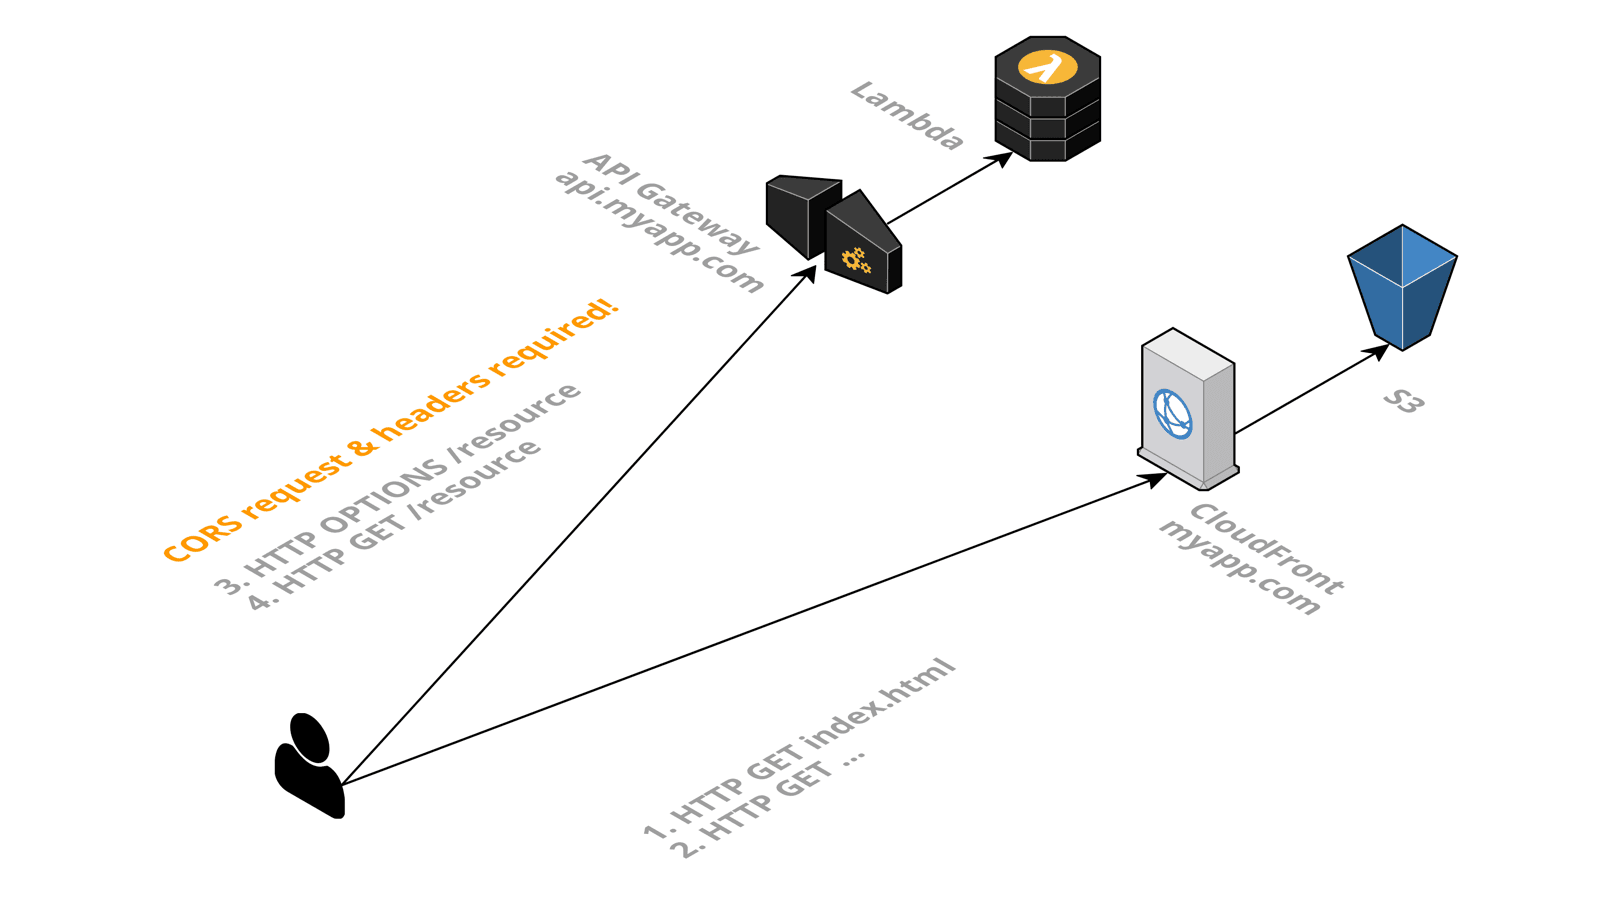 CORS required for Serverless single-page applications with CloudFront and API Gateway